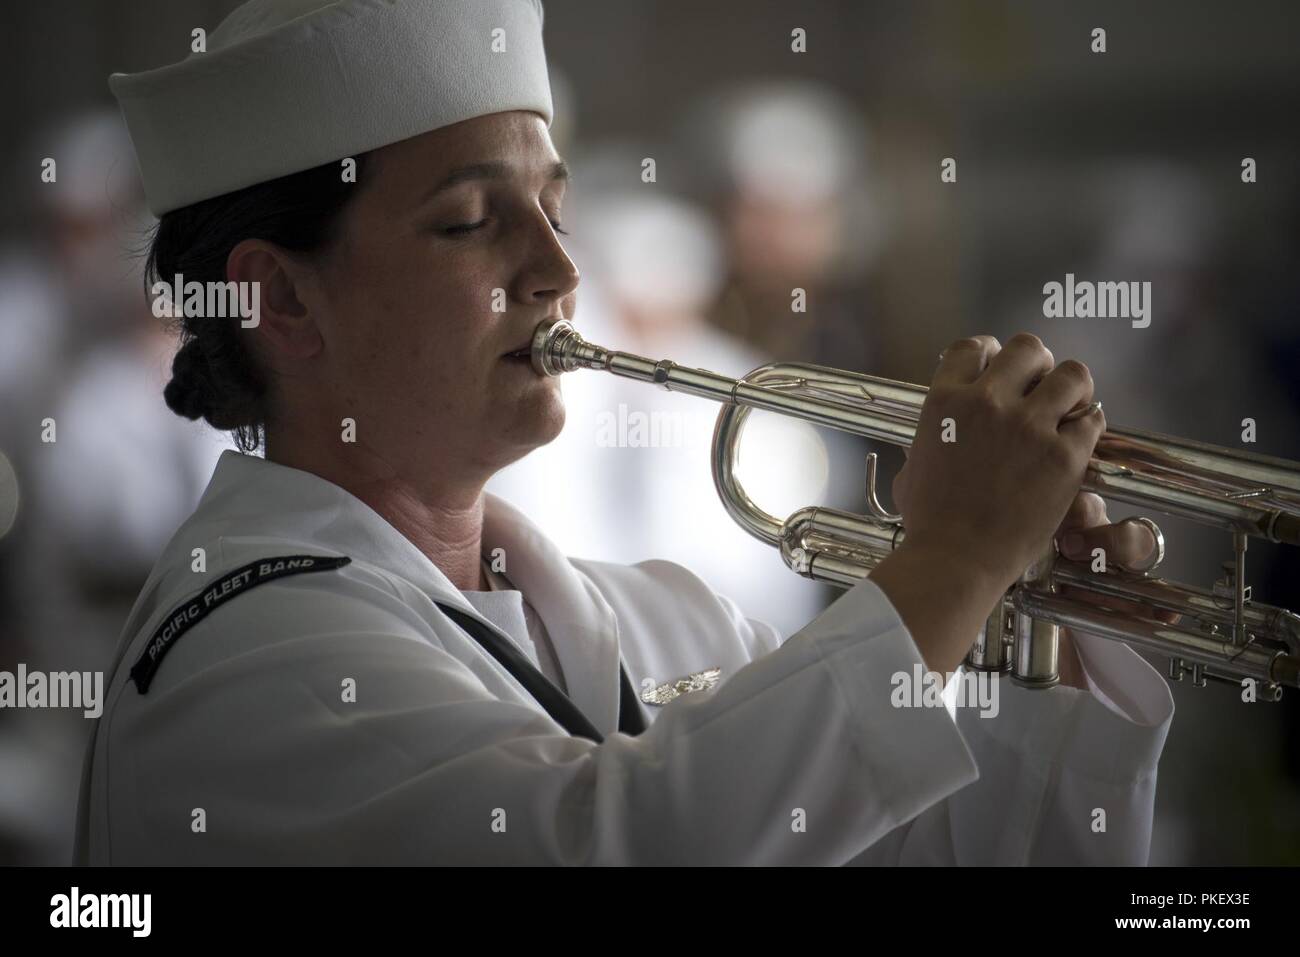 A member of the U.S. Pacific Fleet Band plays 'Taps' during an honorable carry ceremony at  Joint Base Pearl Harbor-Hickam (JBPH-H), Hawaii, Aug. 1, 2018. Attendees, to include Vice  President Mike Pence, U.S. Indo-Pacific Command Commander Navy Adm. Phil Davidson, Rear Adm. Jon Kreitz, Defense POW/MIA Accounting Agency deputy director, Korean War veterans and families of missing Korean and Vietnam troops, were on hand to watch the arrival of 55 flag-draped transfer cases containing what are believed to be the remains of American service members lost in the Korean War. Stock Photo